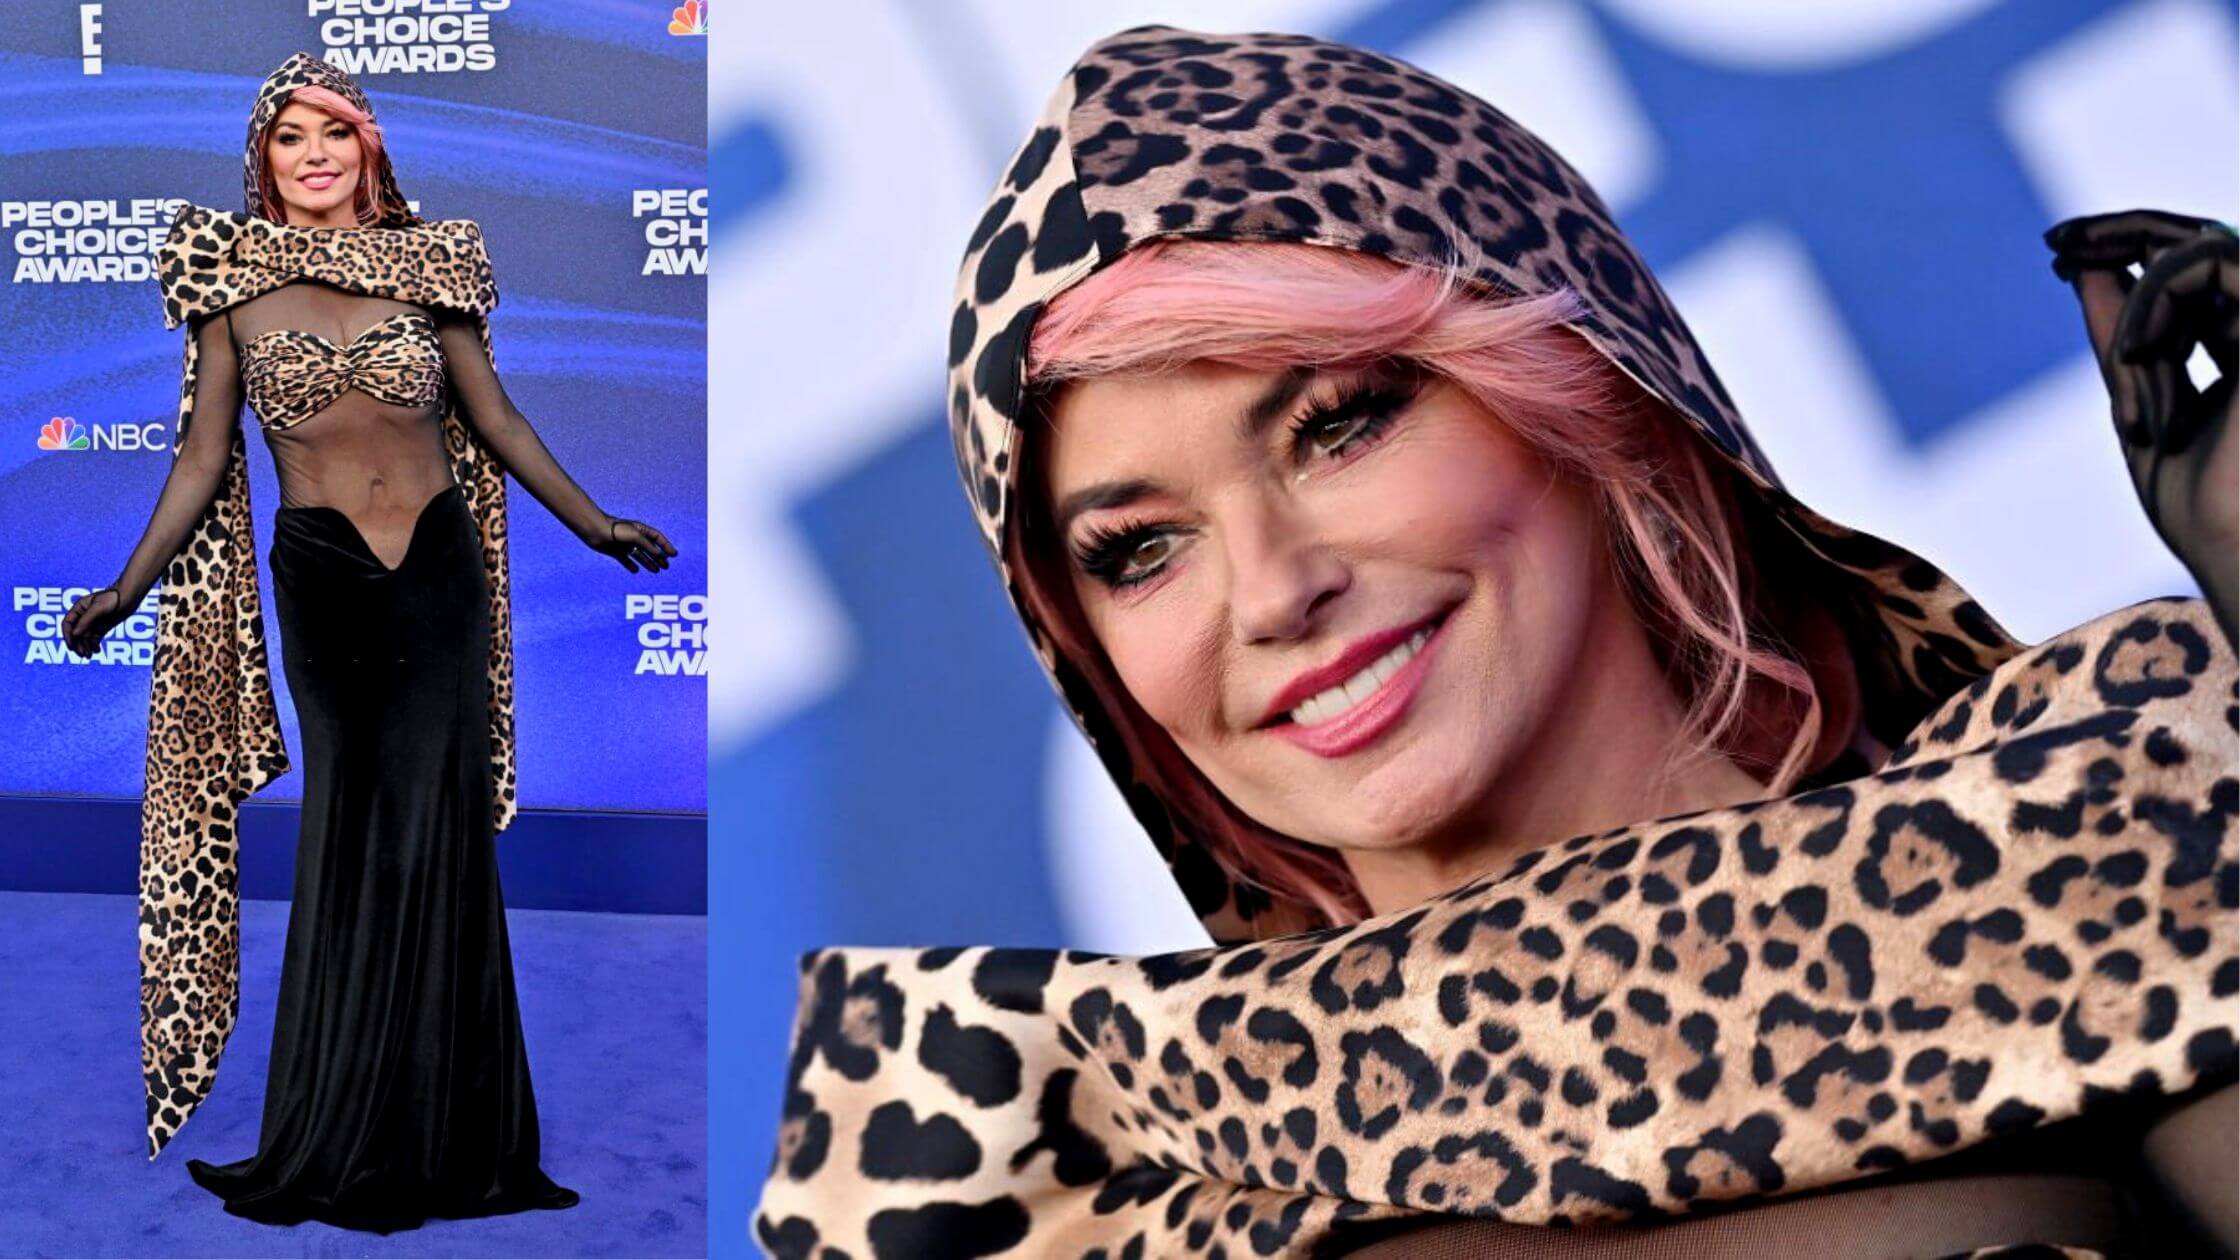 Shania Twain Creating Headlines Again She Swayed In An Iconic Look In The People's Choice Awards!